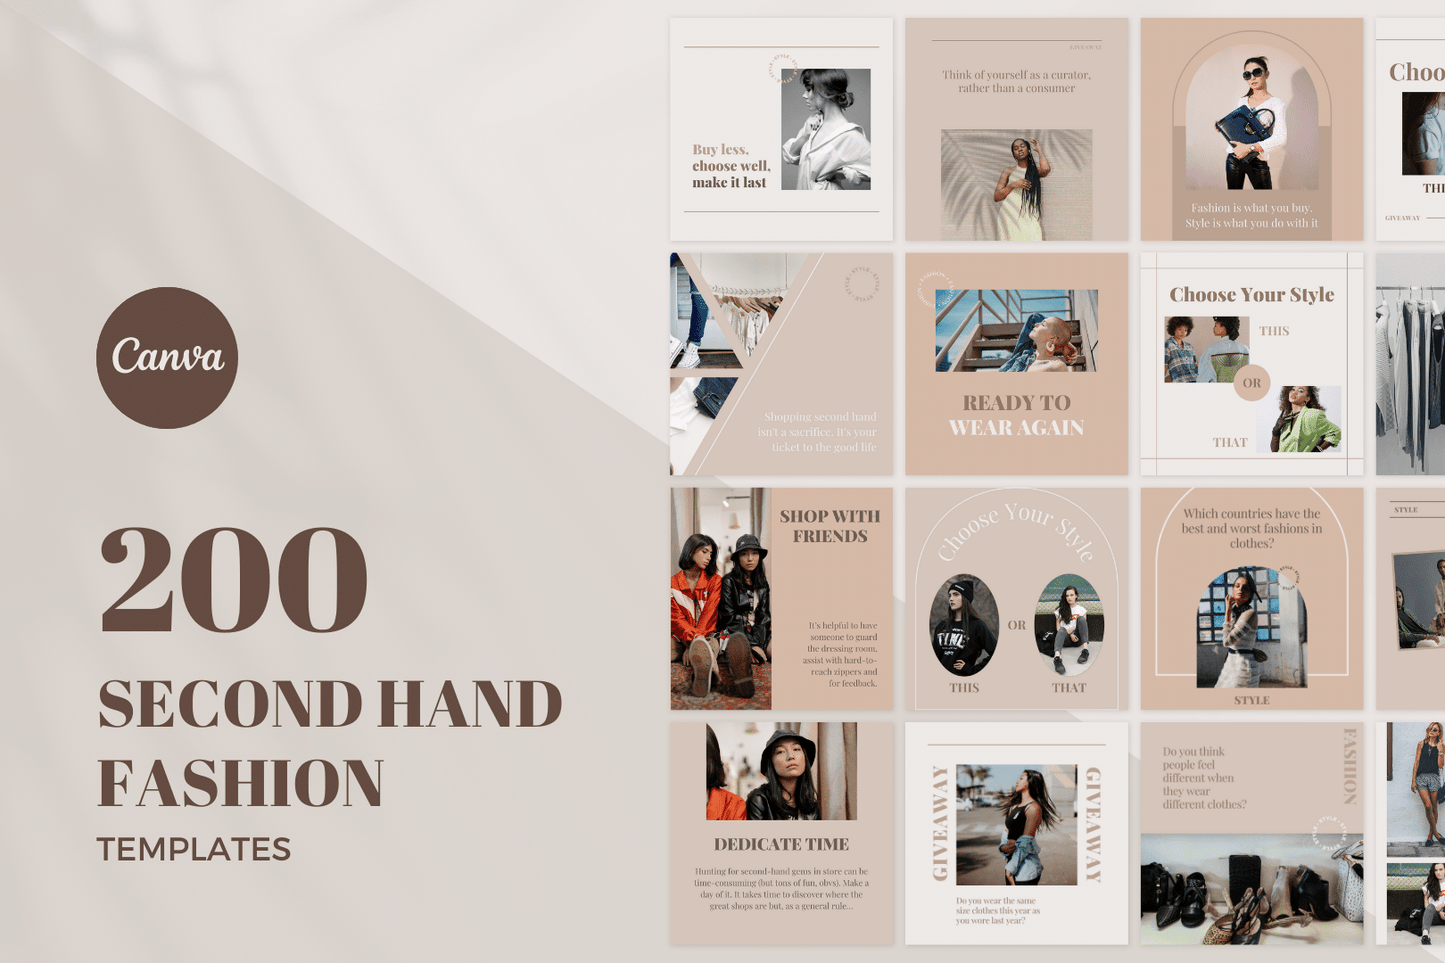 200 Second-Hand Fashion Templates for Social Media